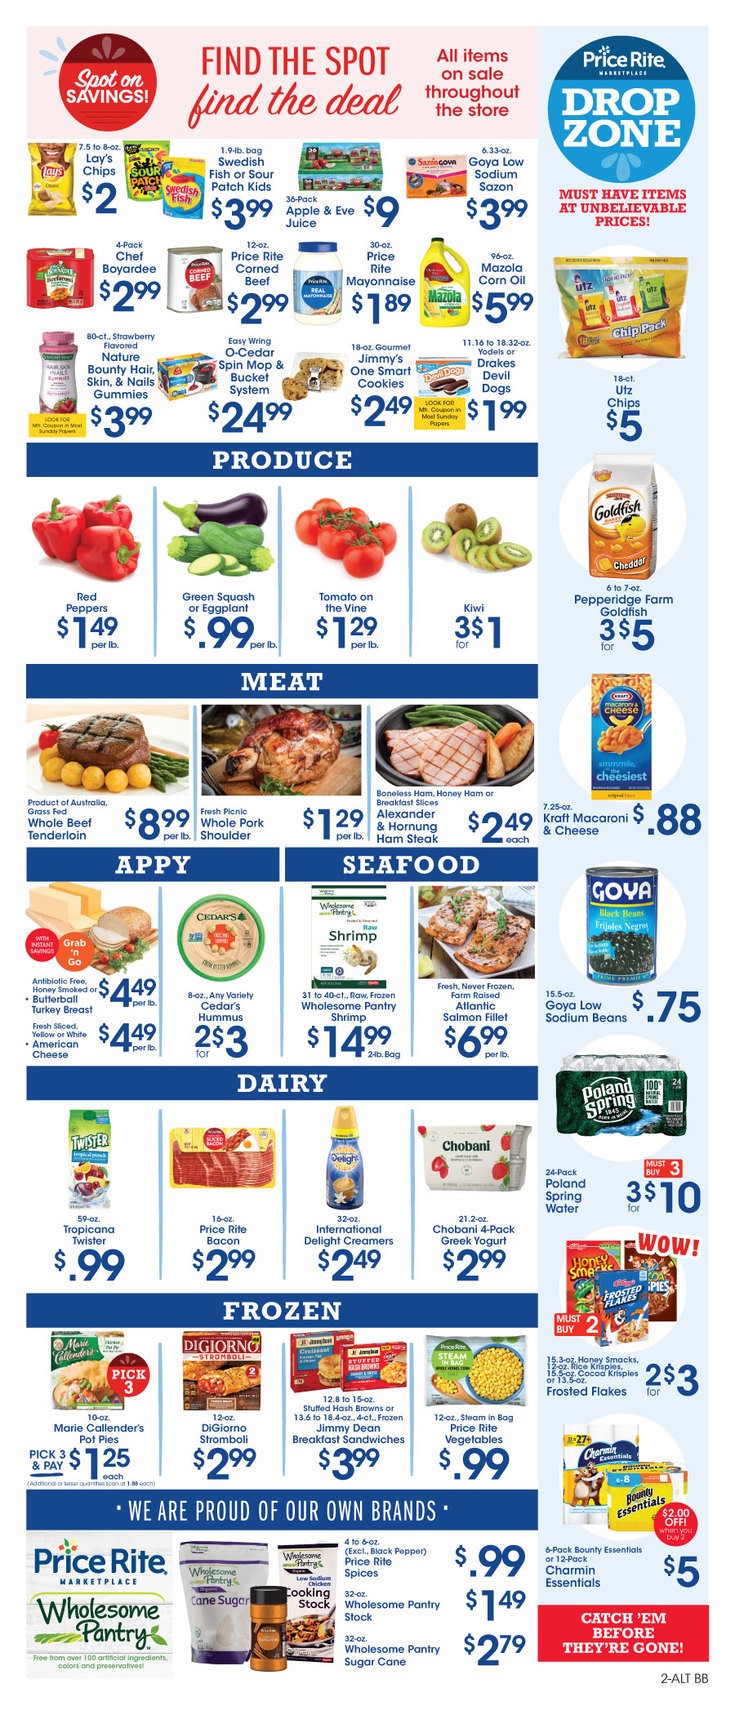 Price Rite Weekly Ad from January 3